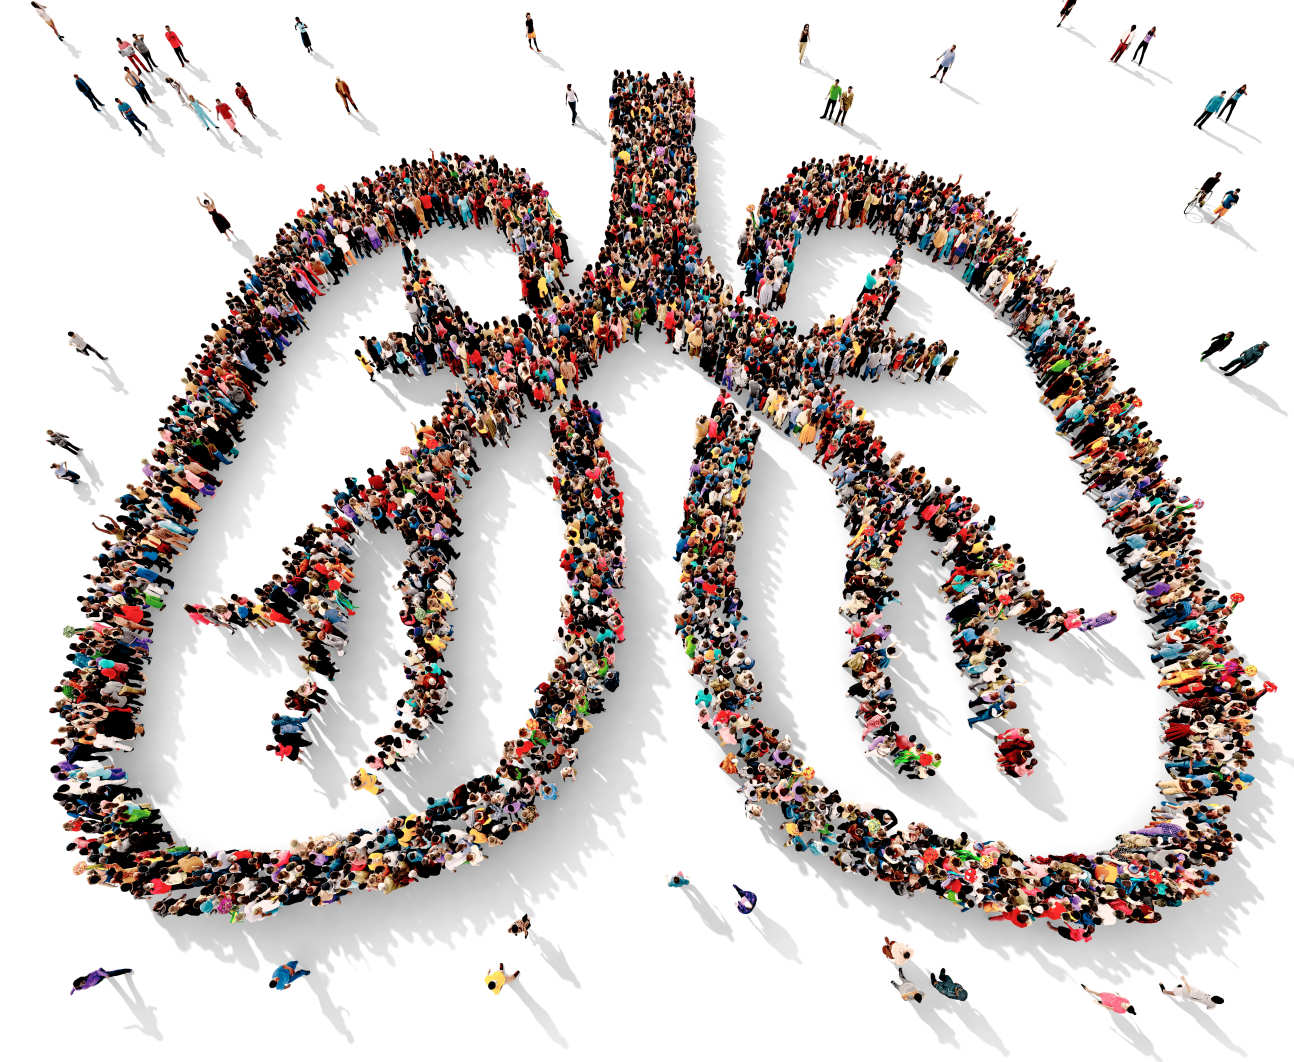 People gathered in the shape of a lung